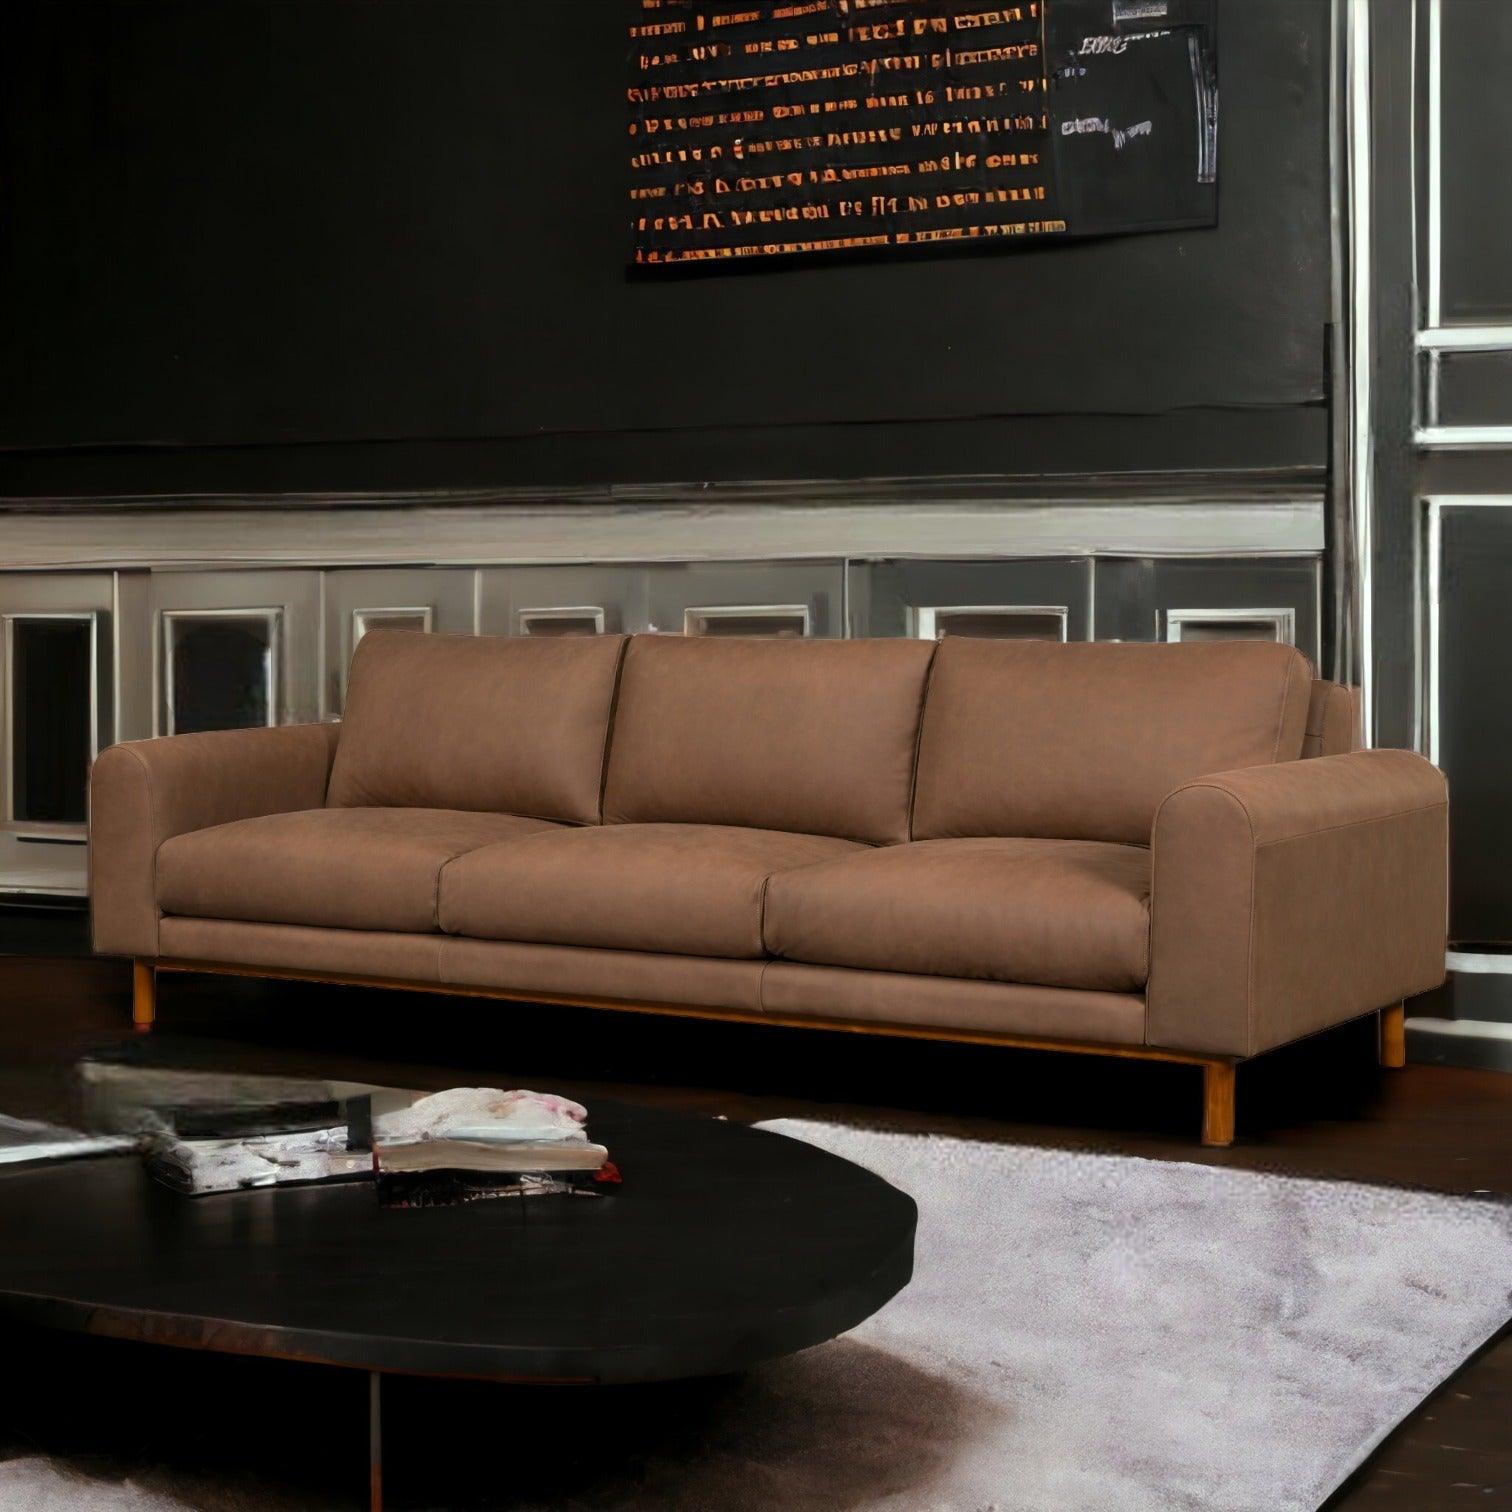 Chica Nubuck Leather Sofa Responsibly Made to Order for Premium Comfort - Uptown Sebastian